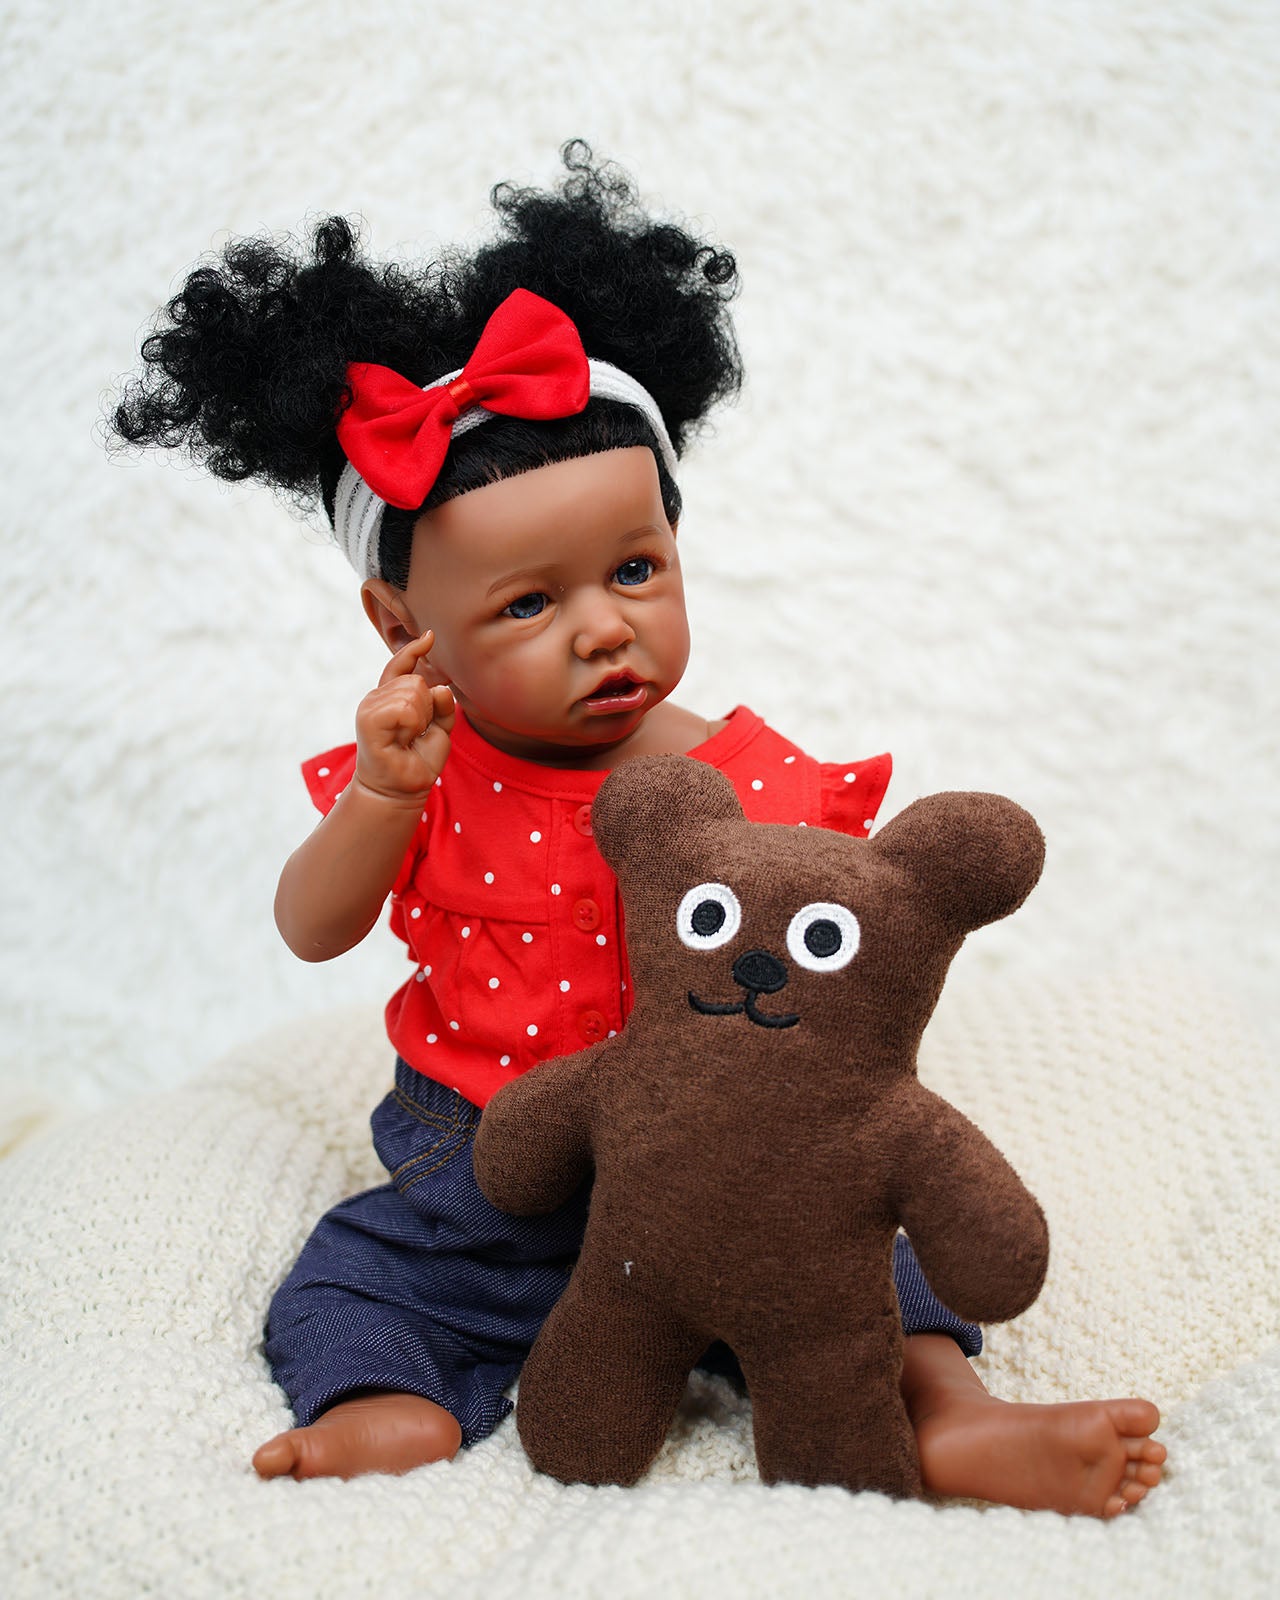 Contee - 20" Reborn Baby Dolls Black African American Newborn Girl with Hand-rooted Hair